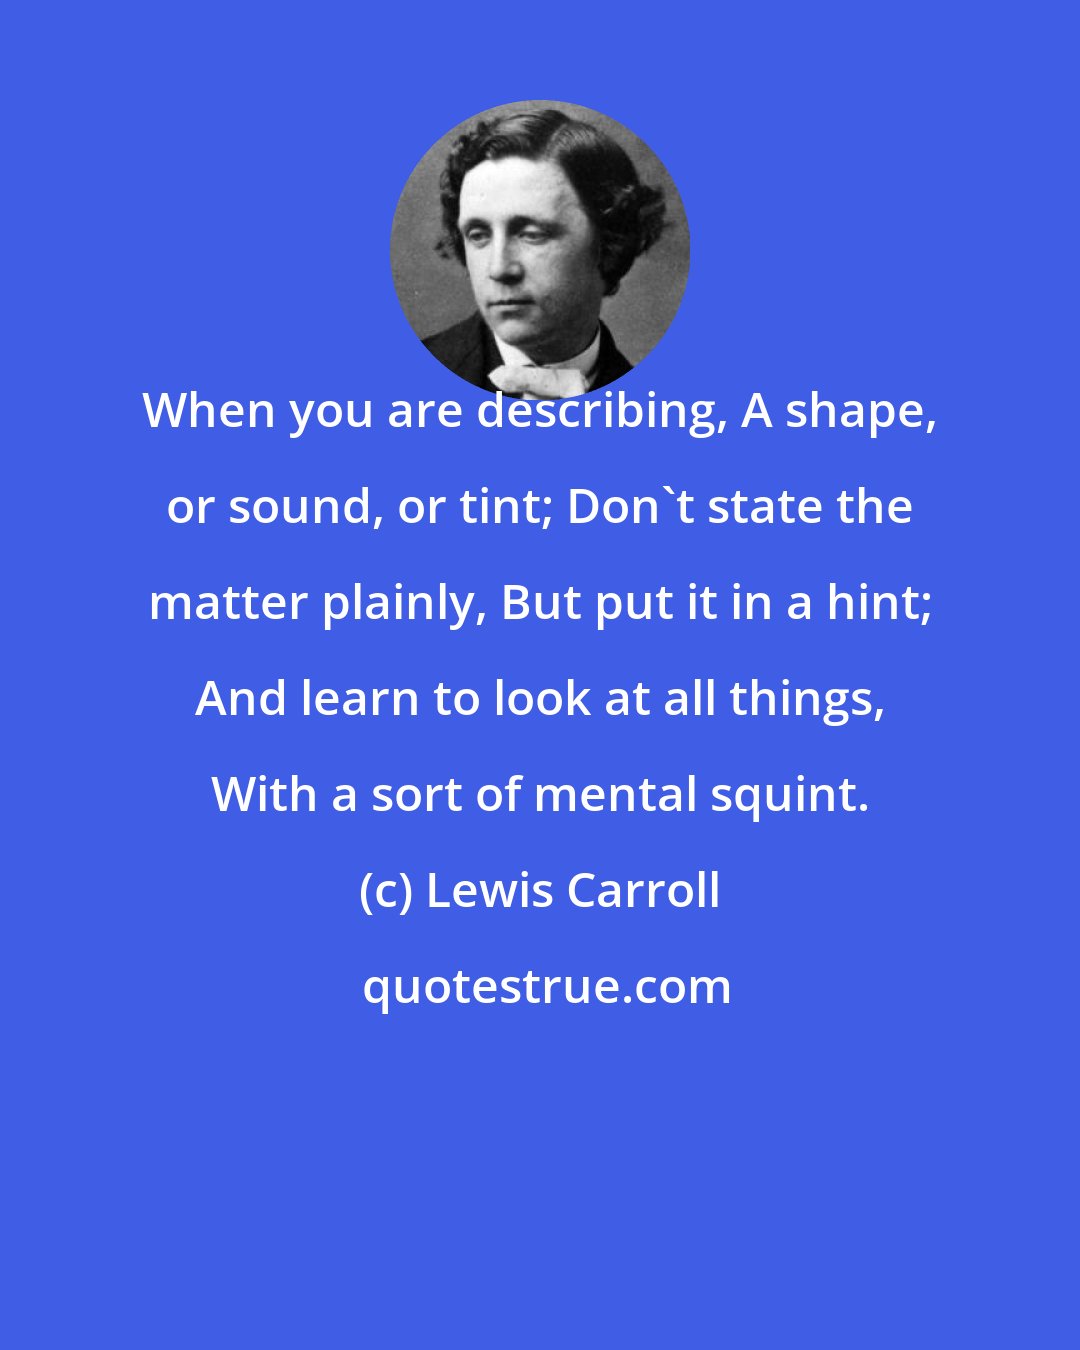 Lewis Carroll: When you are describing, A shape, or sound, or tint; Don't state the matter plainly, But put it in a hint; And learn to look at all things, With a sort of mental squint.